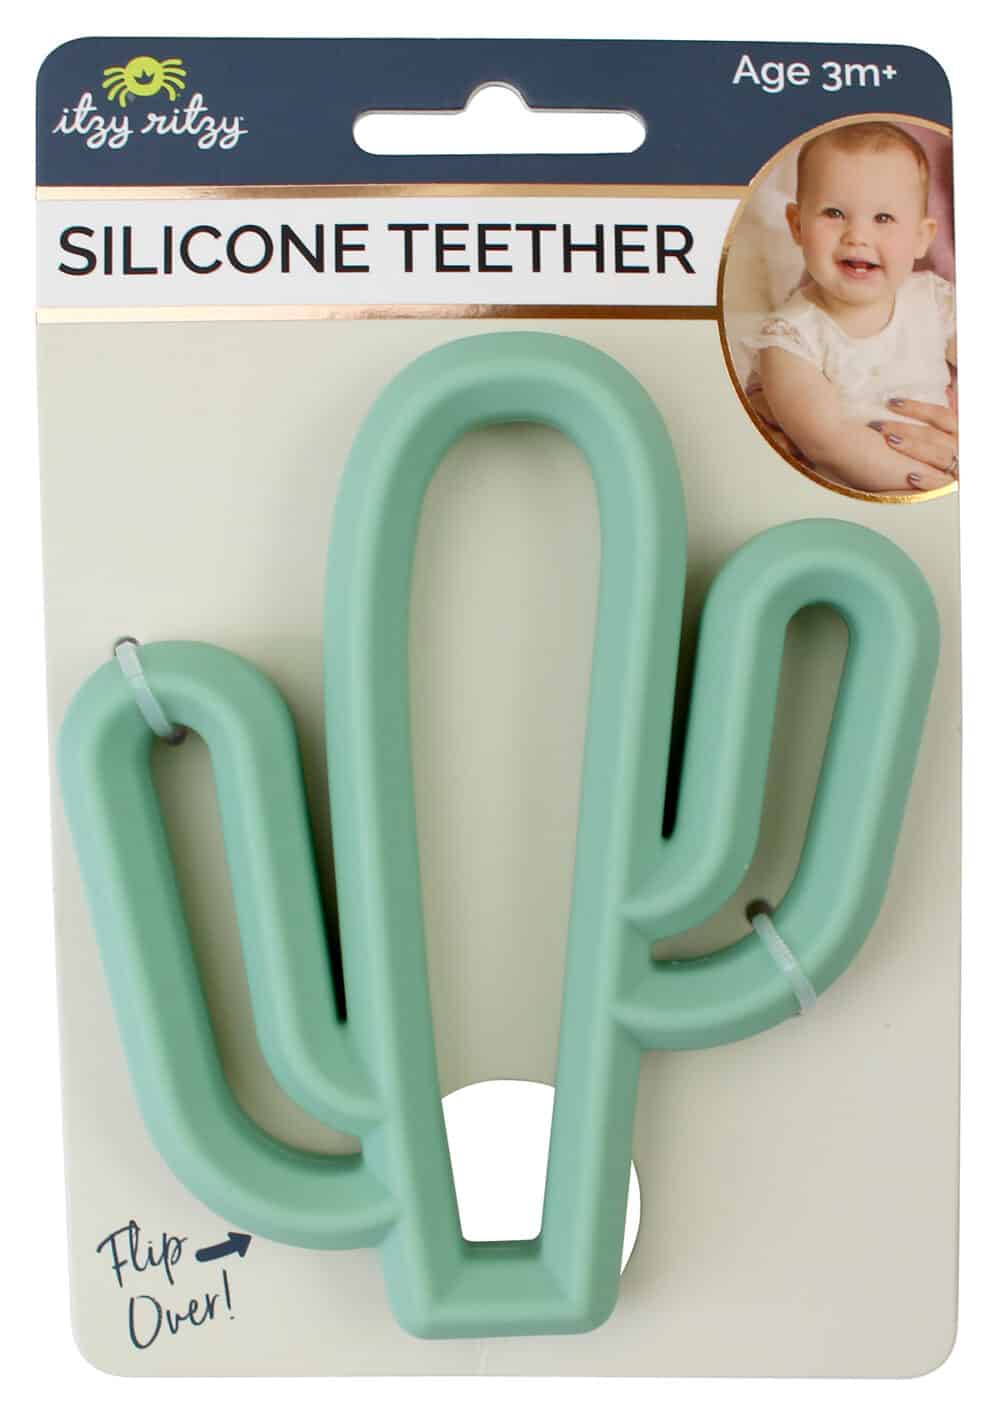 A baby cactus silicone teether in a package.